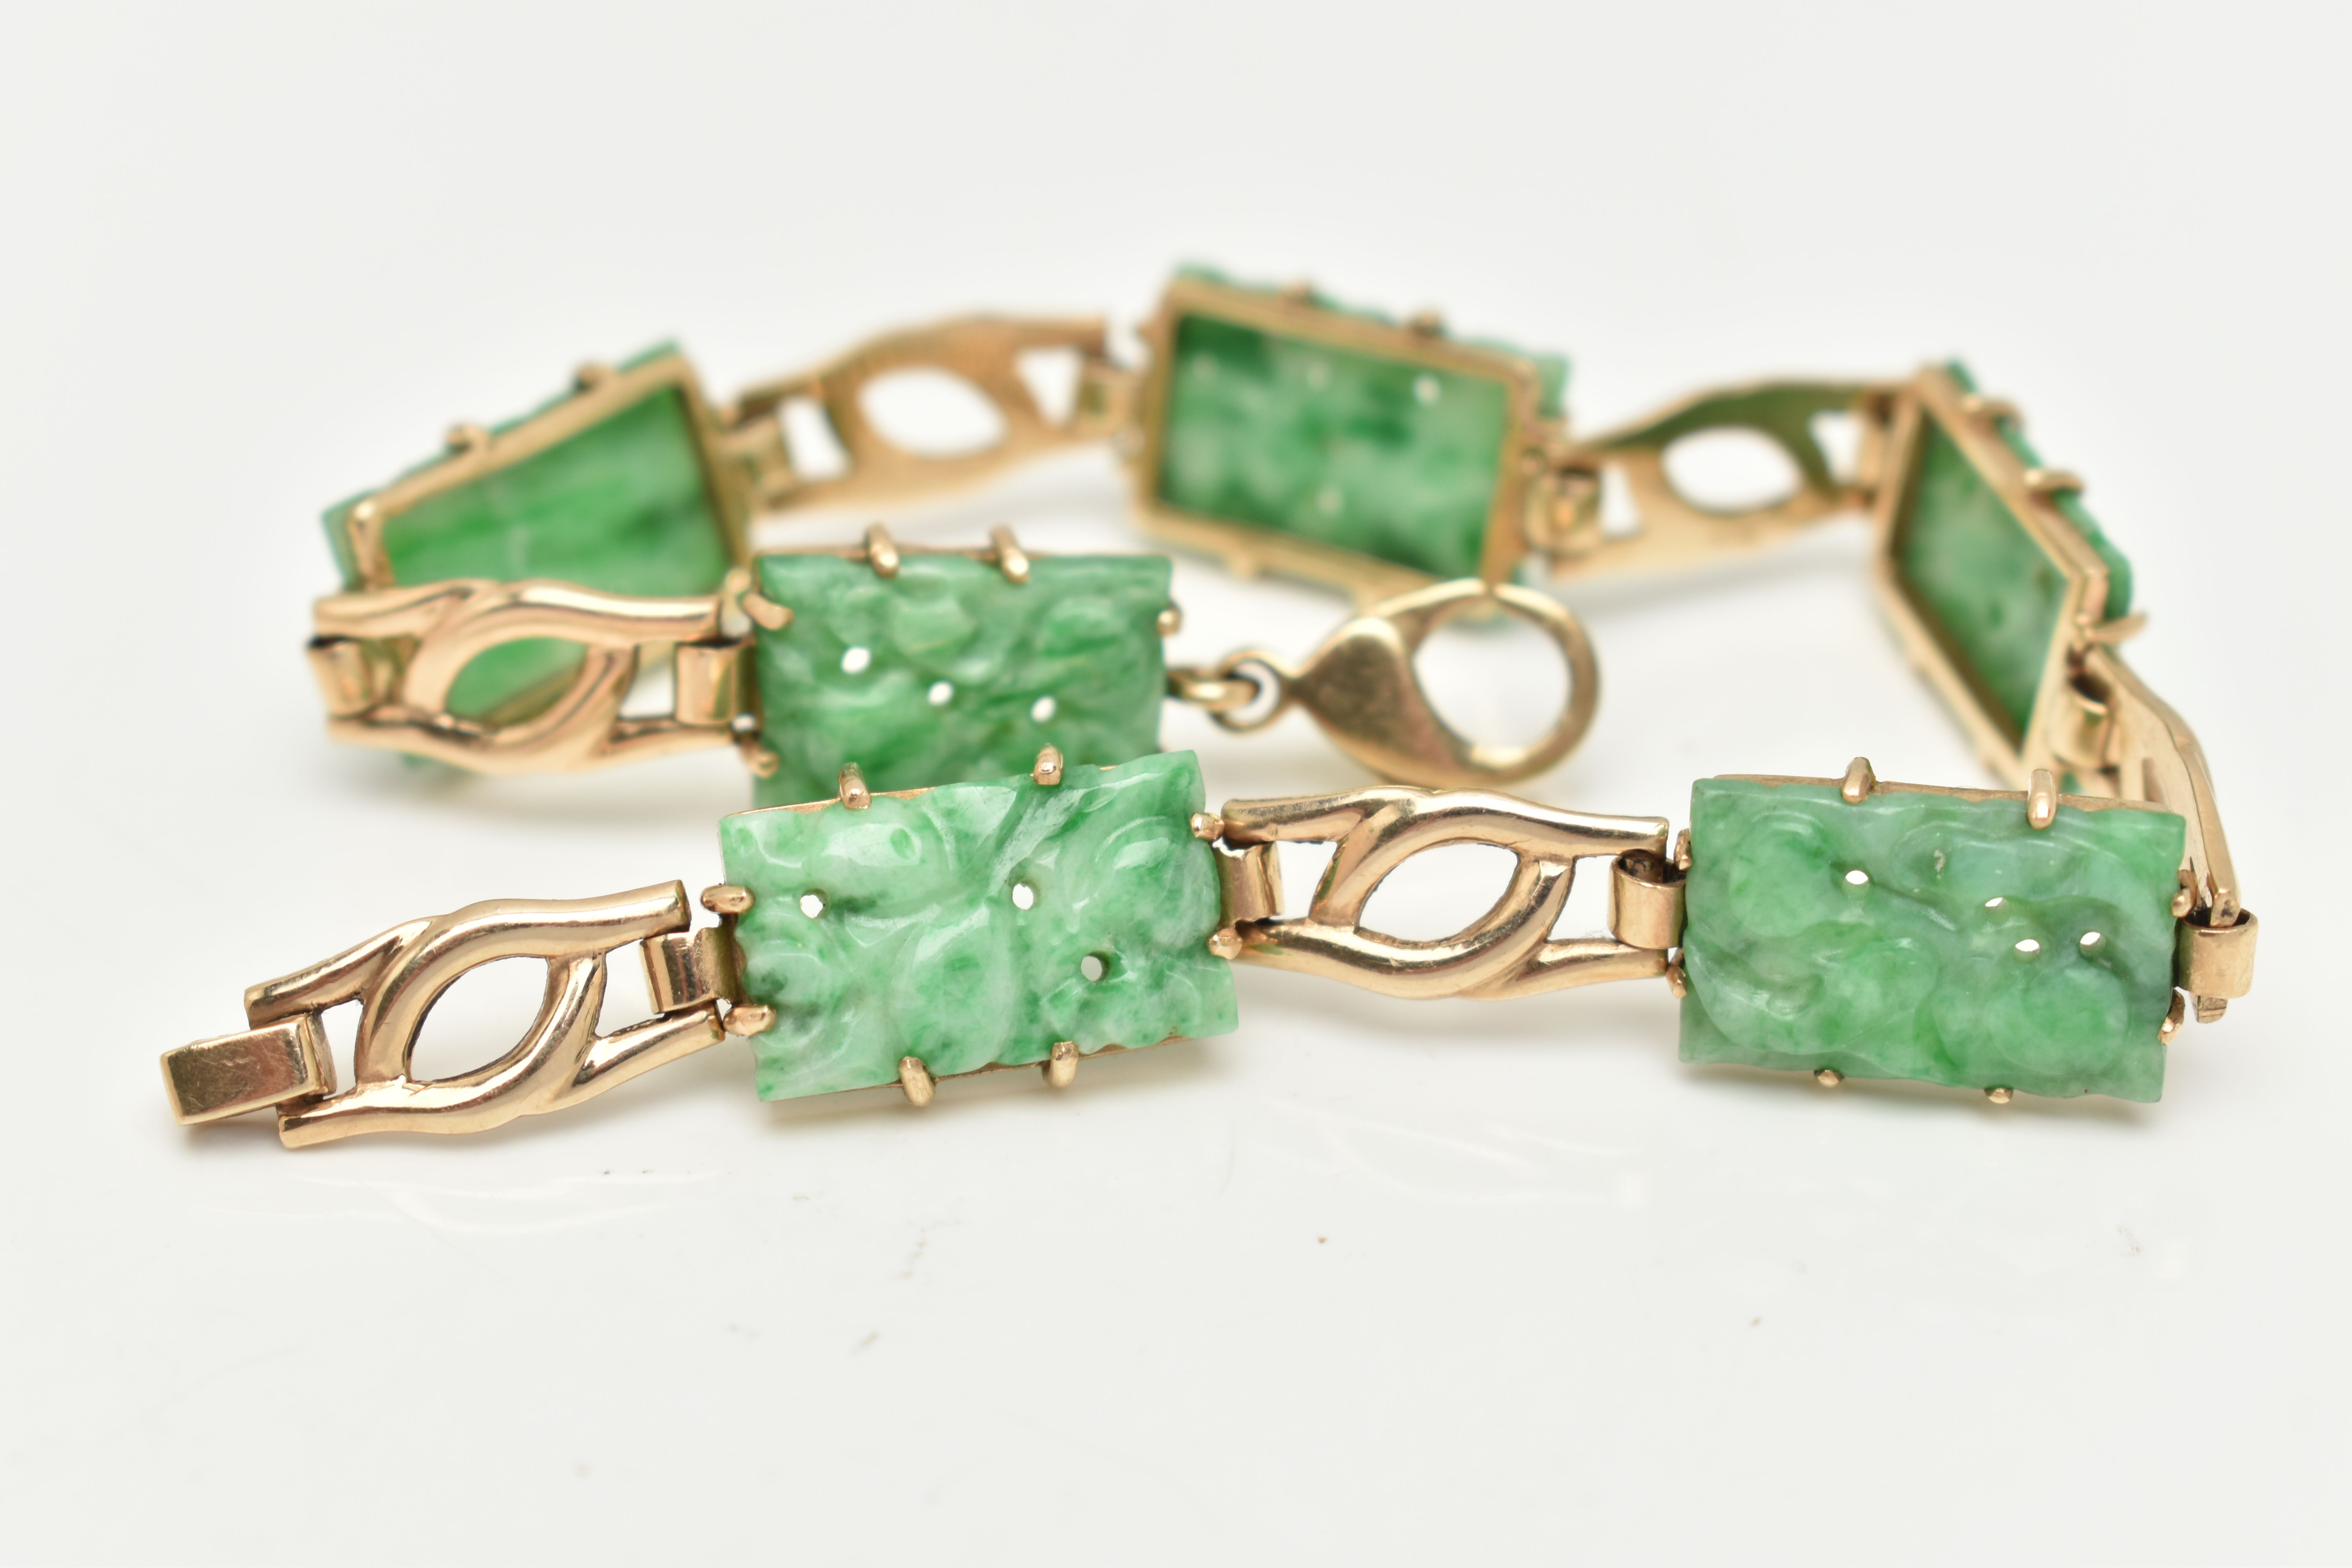 A 9CT GOLD JADE PANEL BRACELET, the rectangular jade panels carved to depict fruits and foliage, - Image 3 of 5